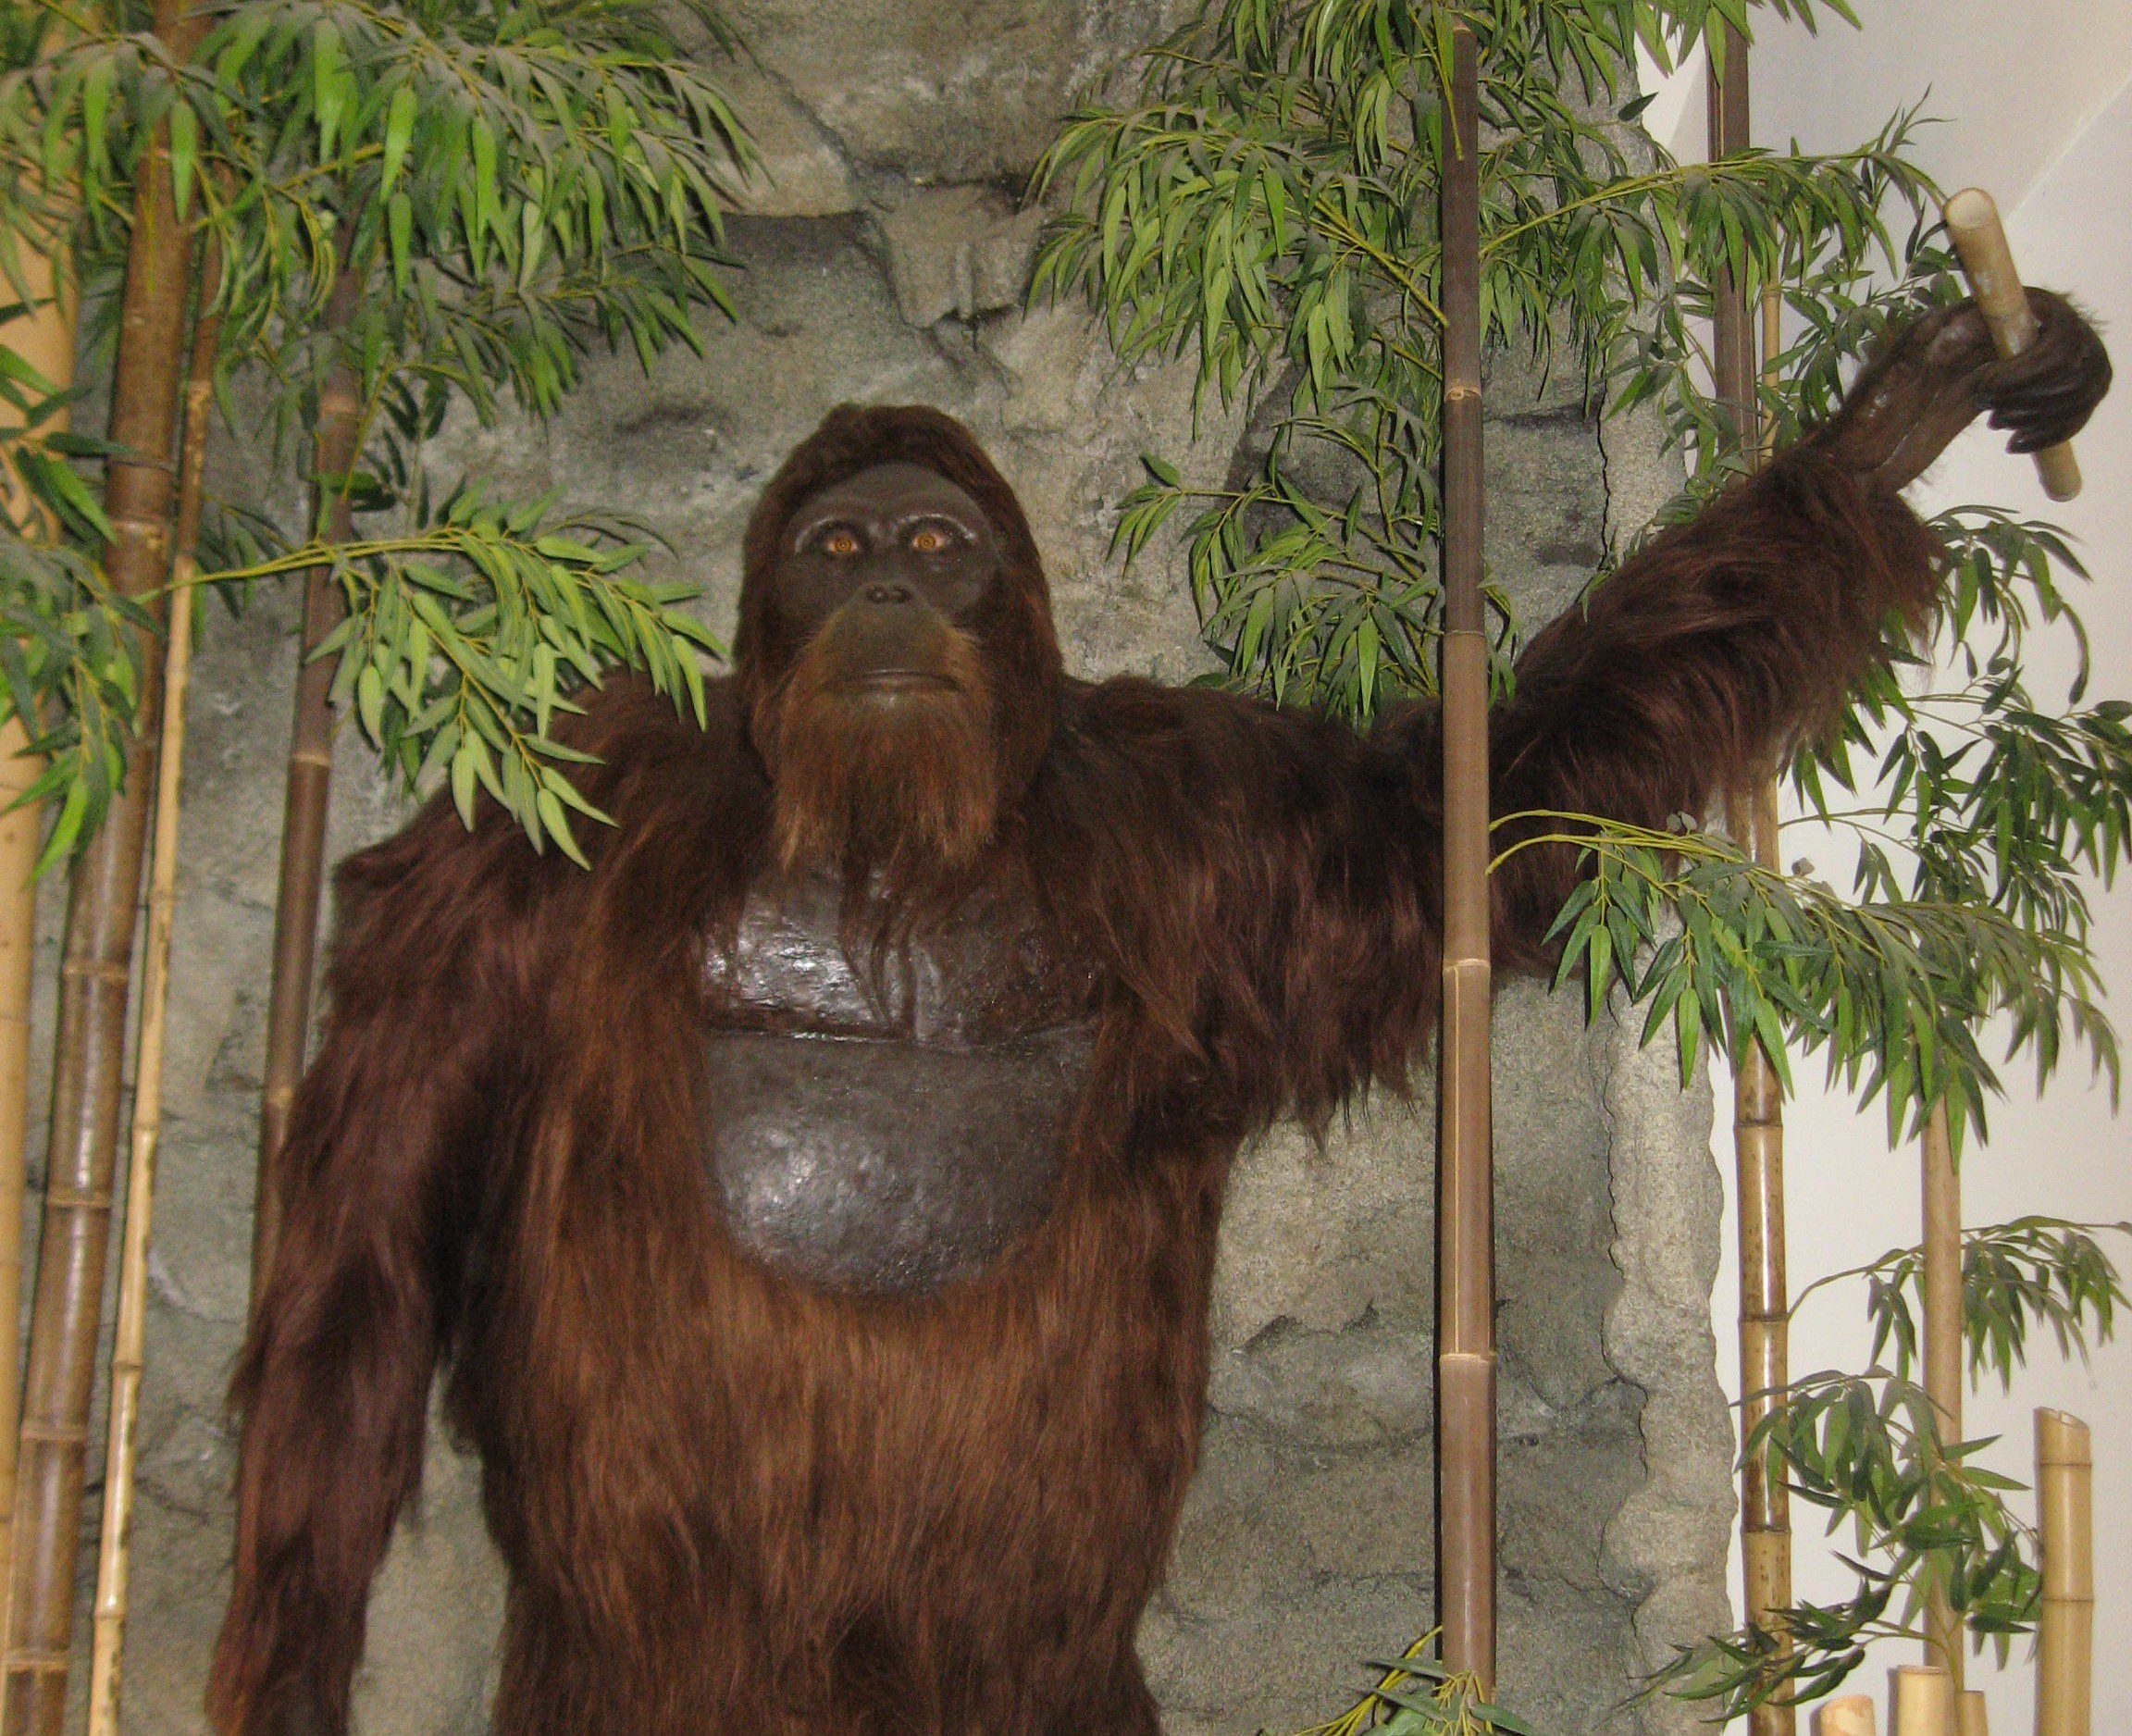 A model of Gigantopithecus, which has since been rehomed, pictured at the Museum of US in San Diego.